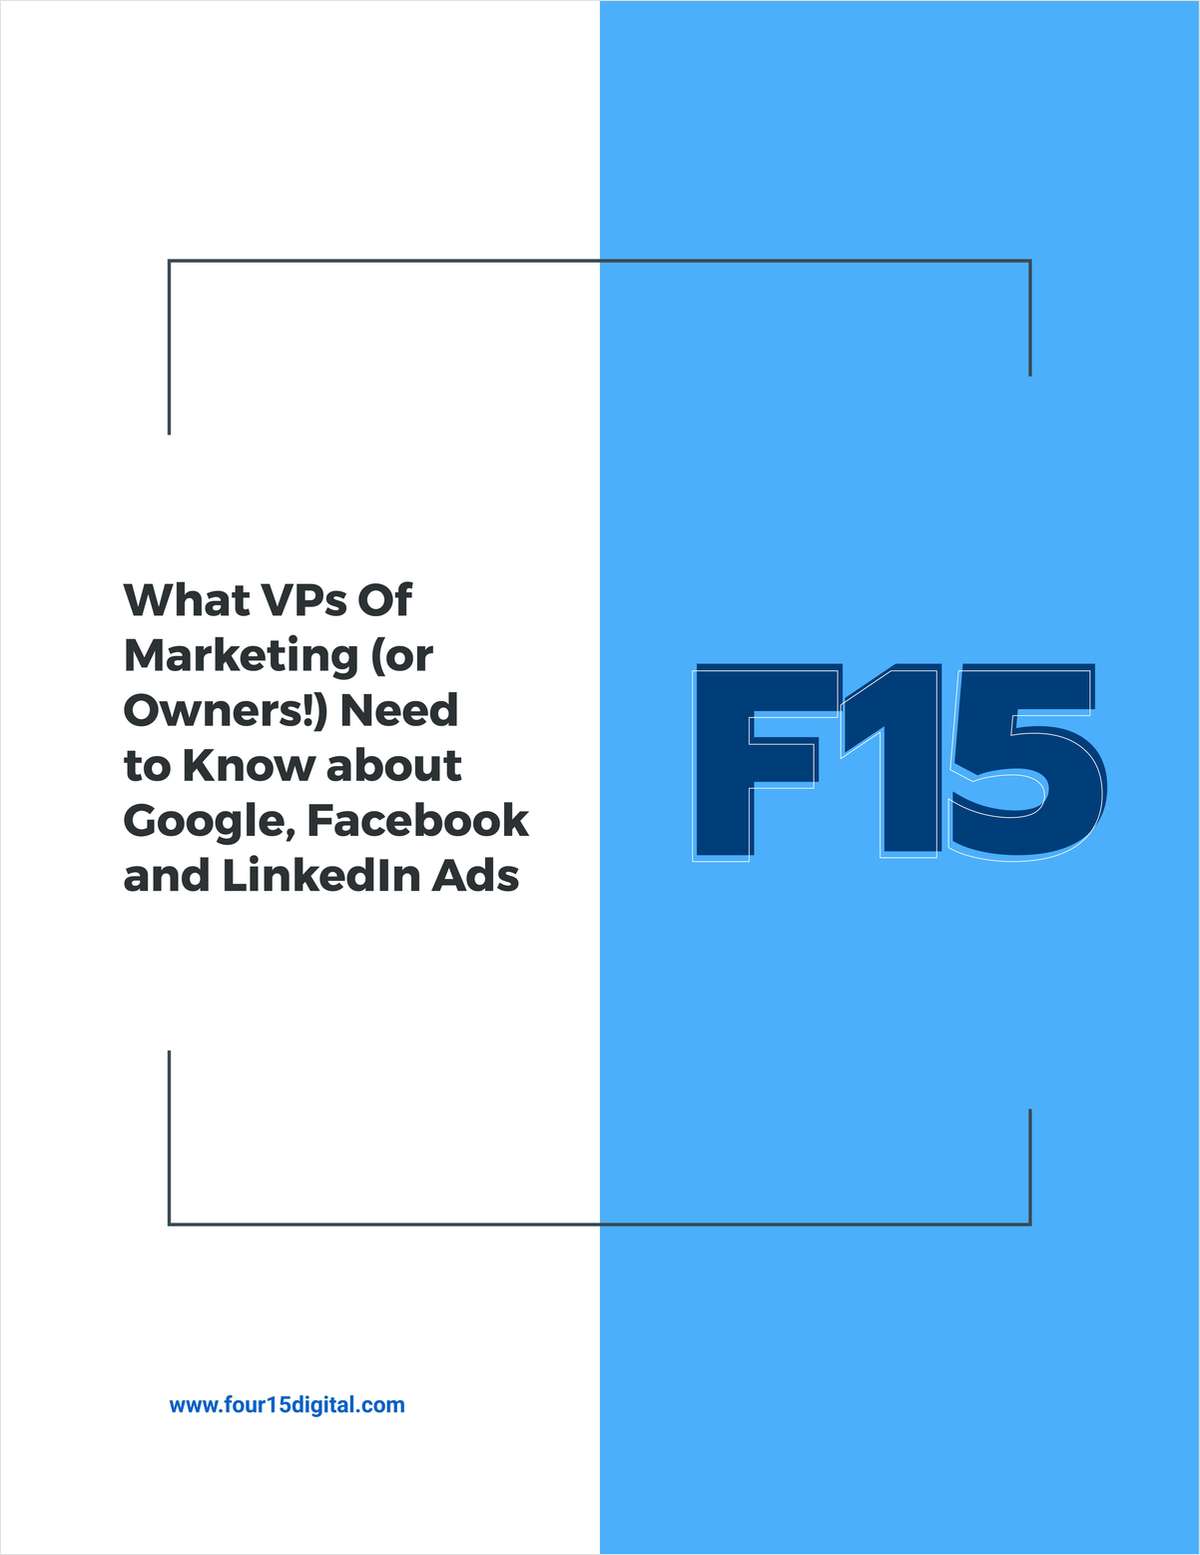 What You Need to Know about Google, Facebook, and LinkedIn Ads as a VP or Owner!